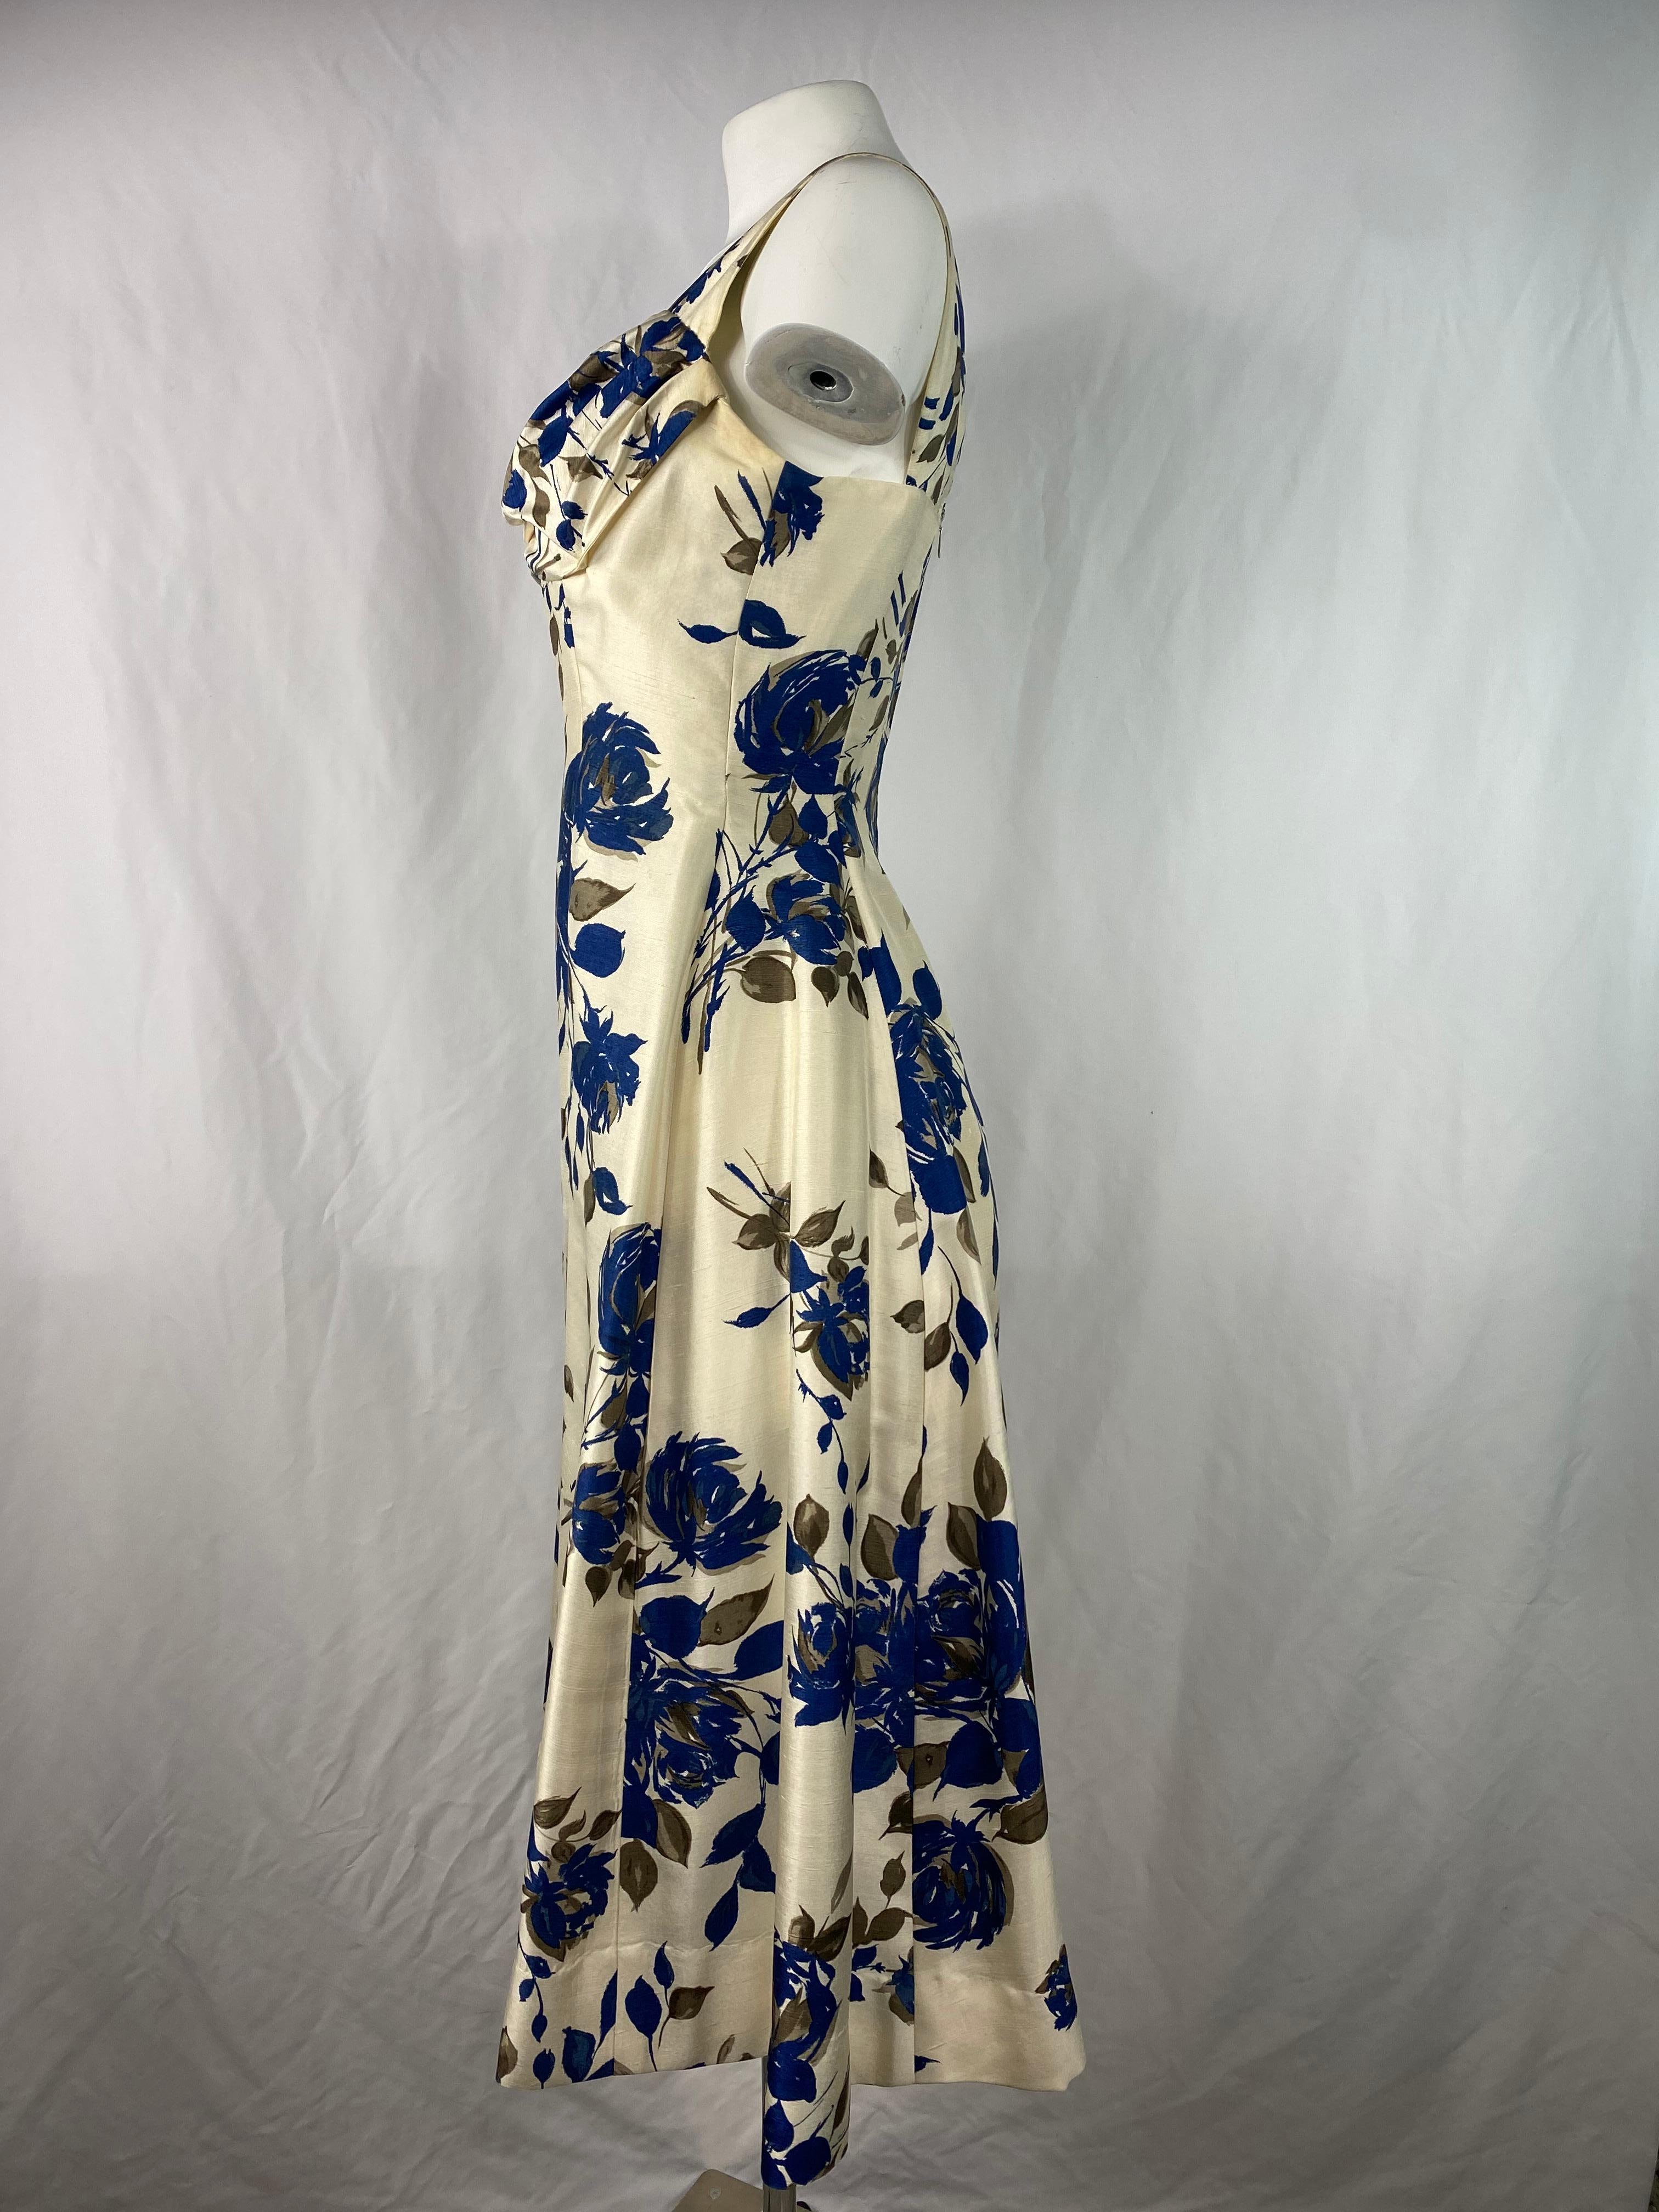 Marwi Cream and Navy Floral Sleeveless Dress, Size 40 For Sale 1